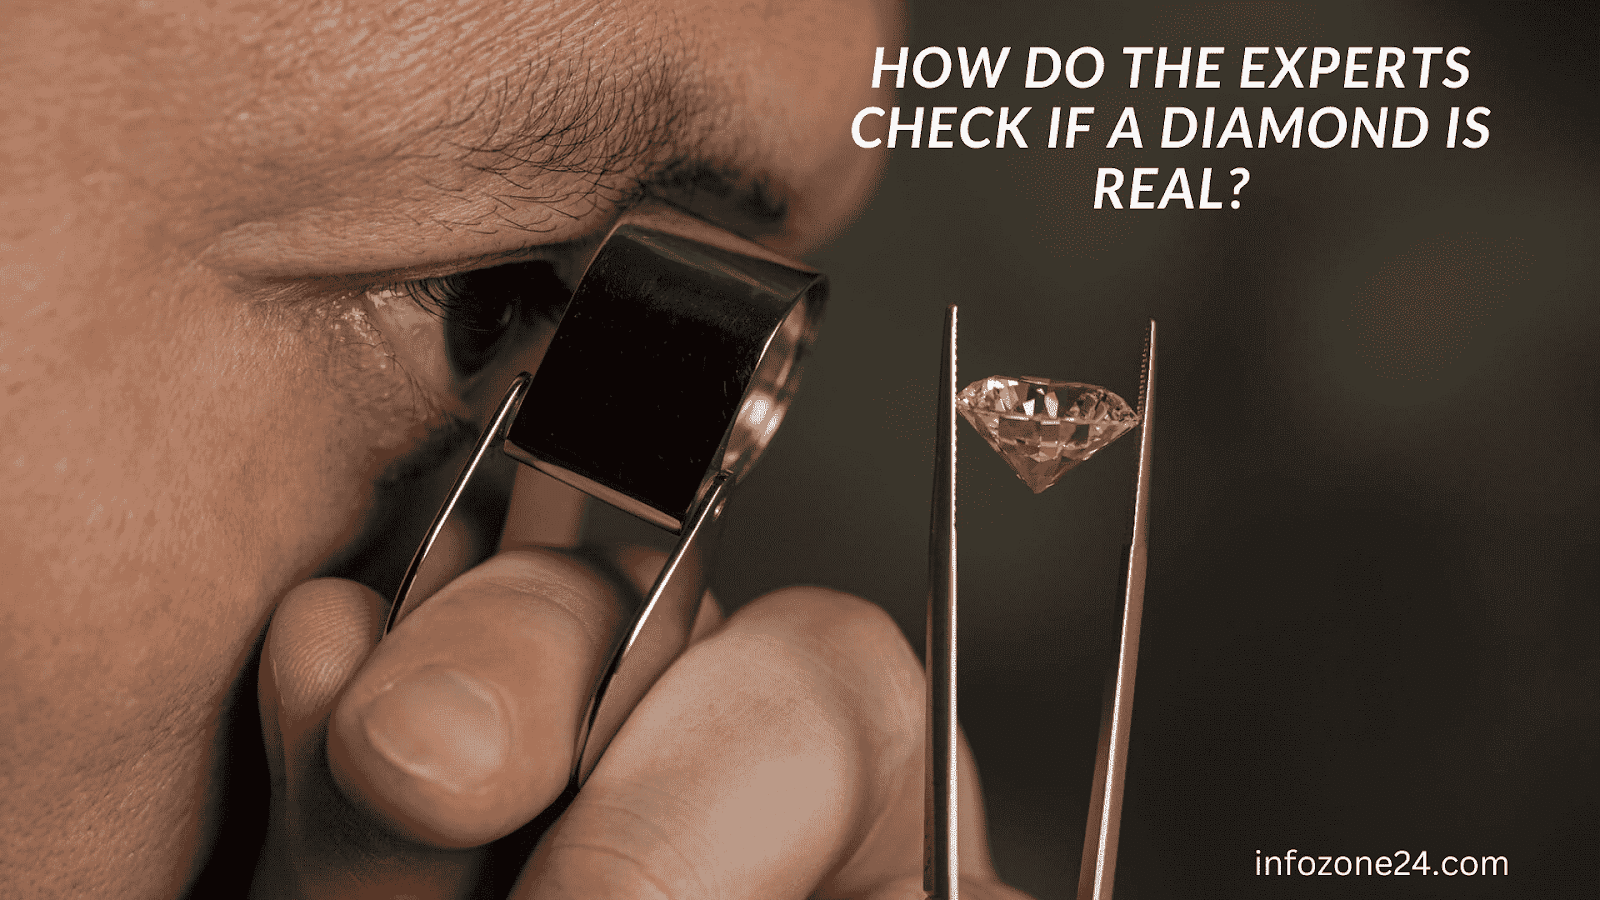 How Do The Experts Check If a Diamond is Real or Fake